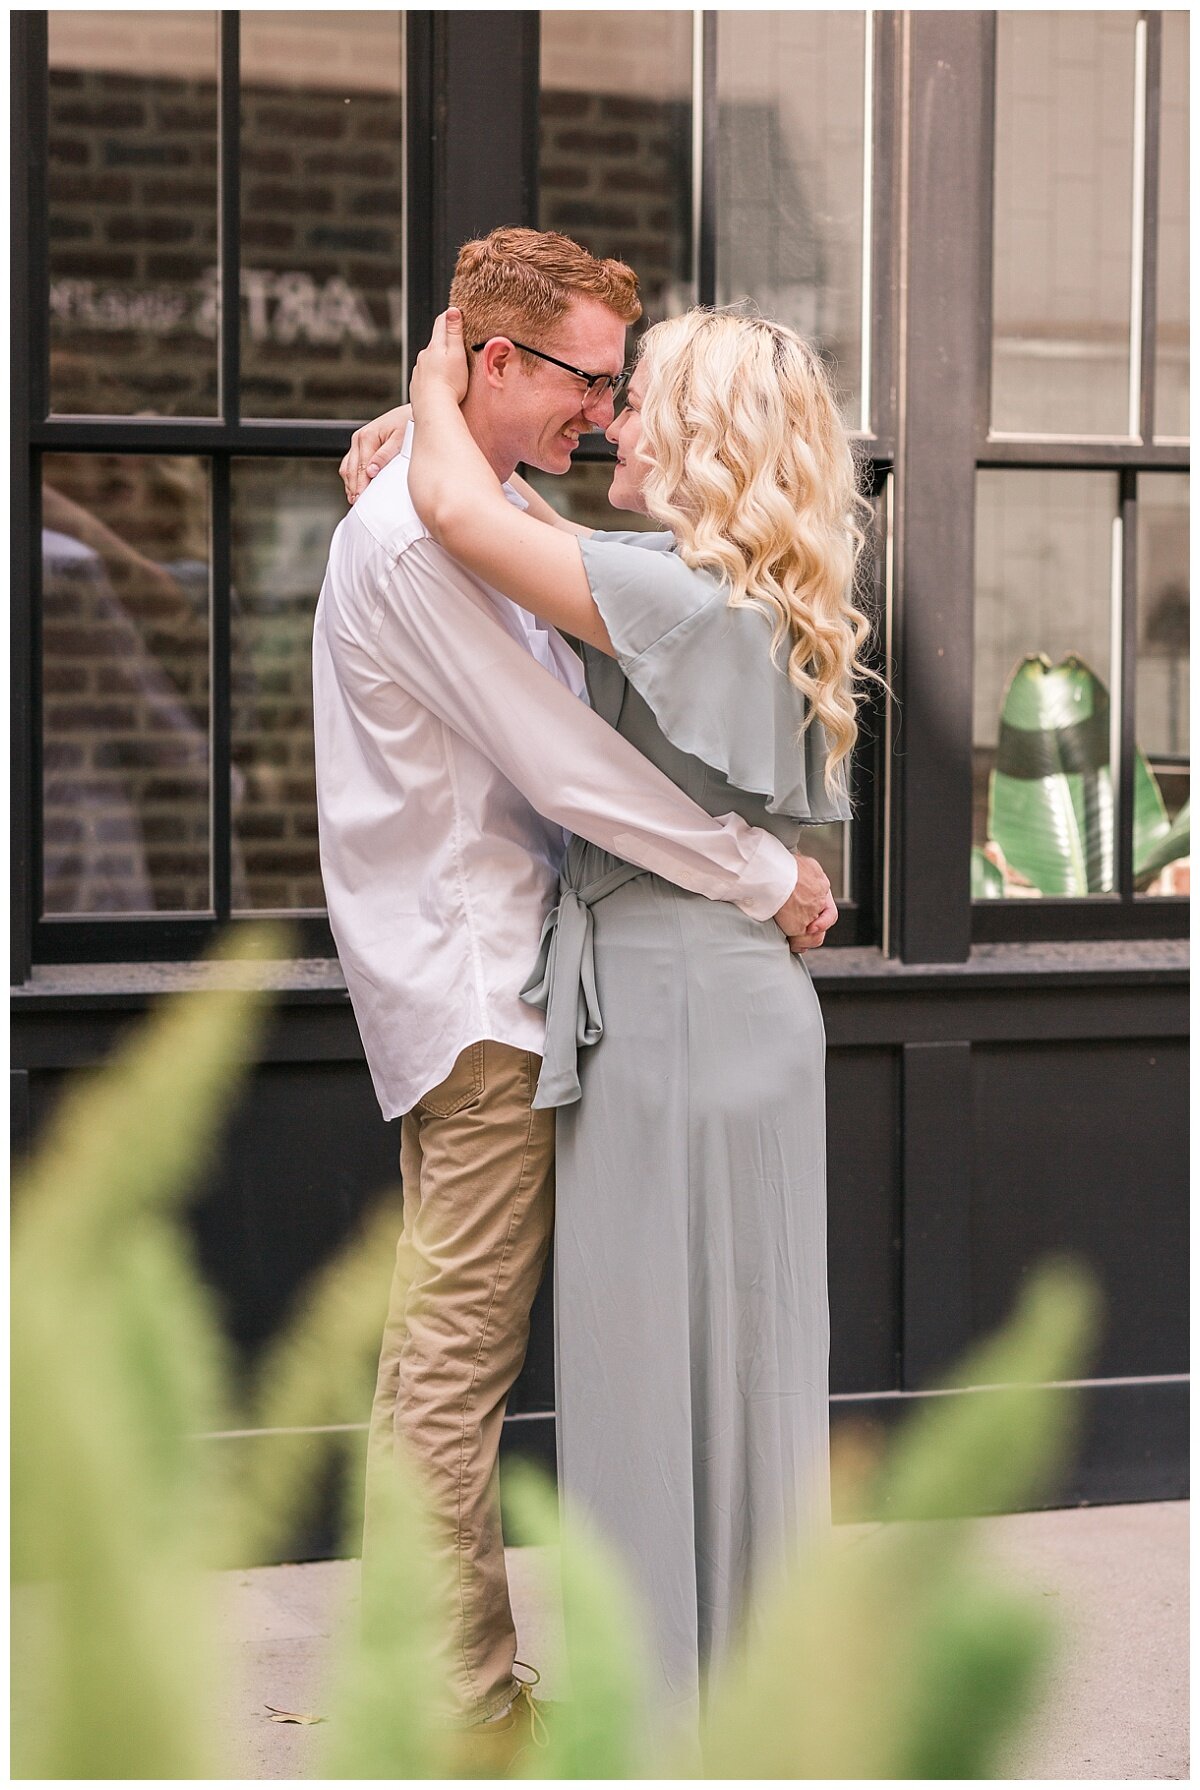 Engagement pictures at St. Phillips Plaza in Tucson, Arizona. Couple wearing grey maxi dress and white shirt with tan pants. Couple holds each other close, nose to nose, while Melissa Fritzsche Photography captures the sweet moment.